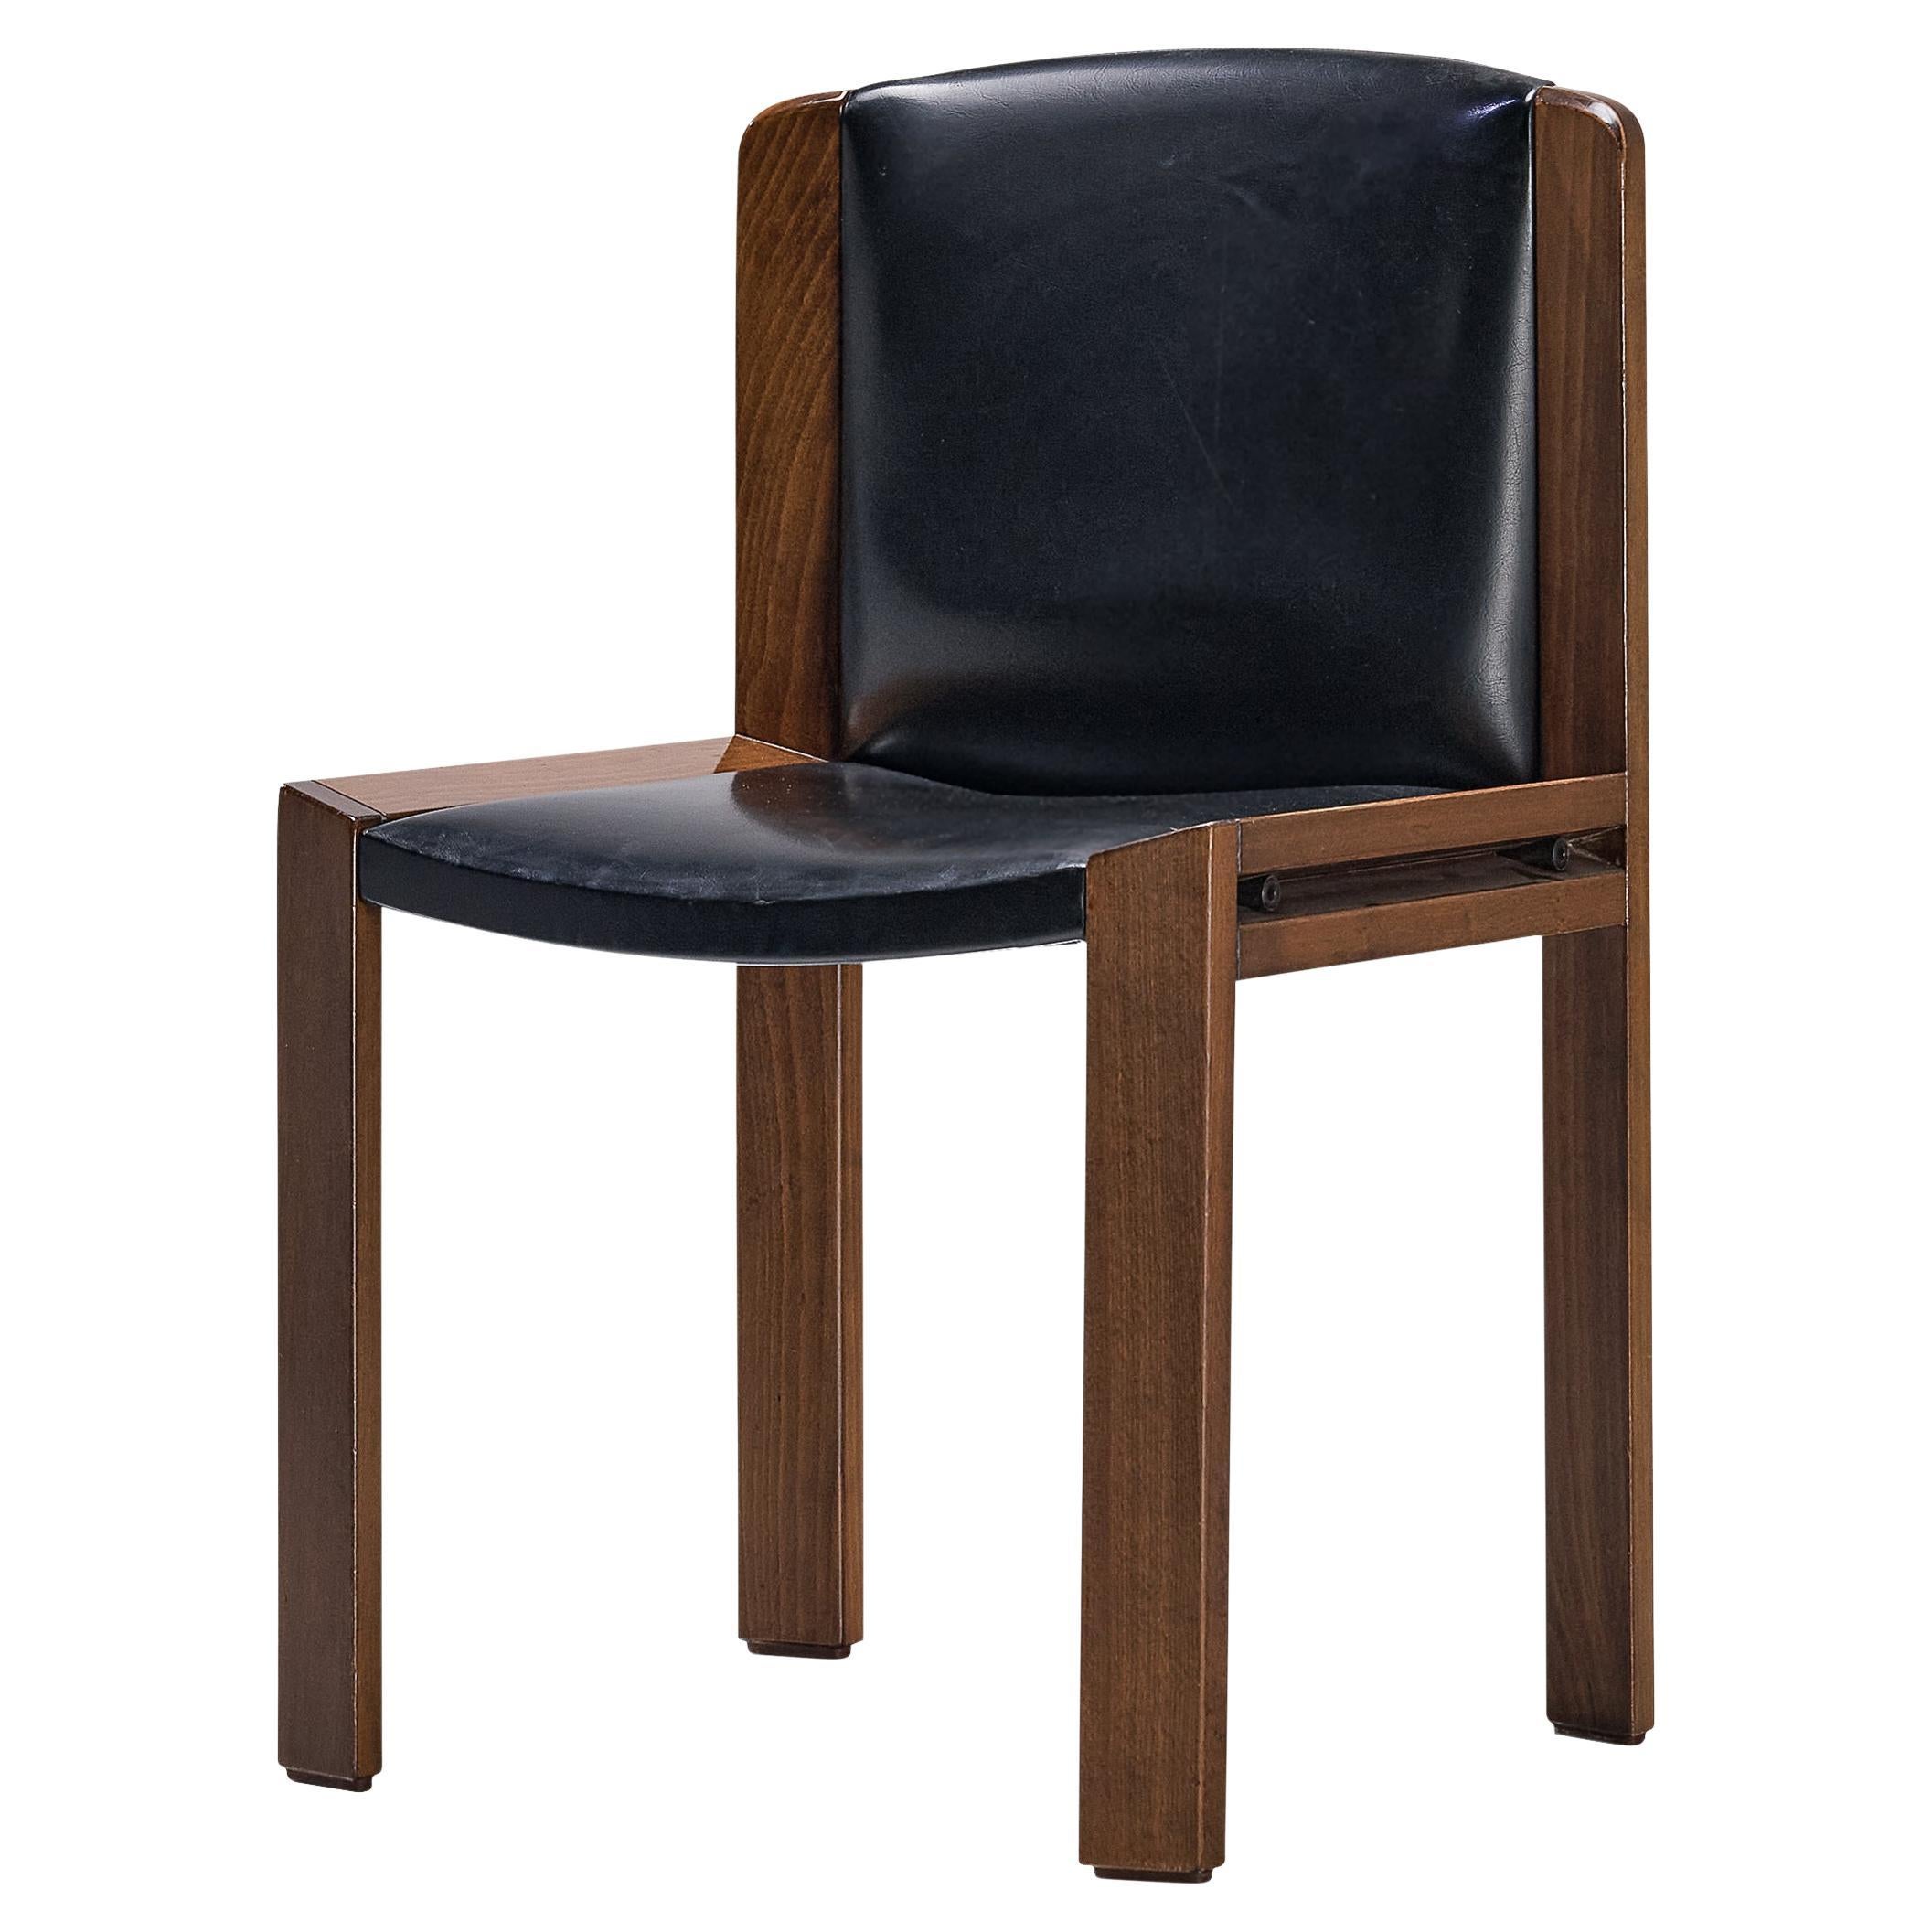 Joe Colombo for Pozzi '300' Dining Chair in Black Leatherette and Wood